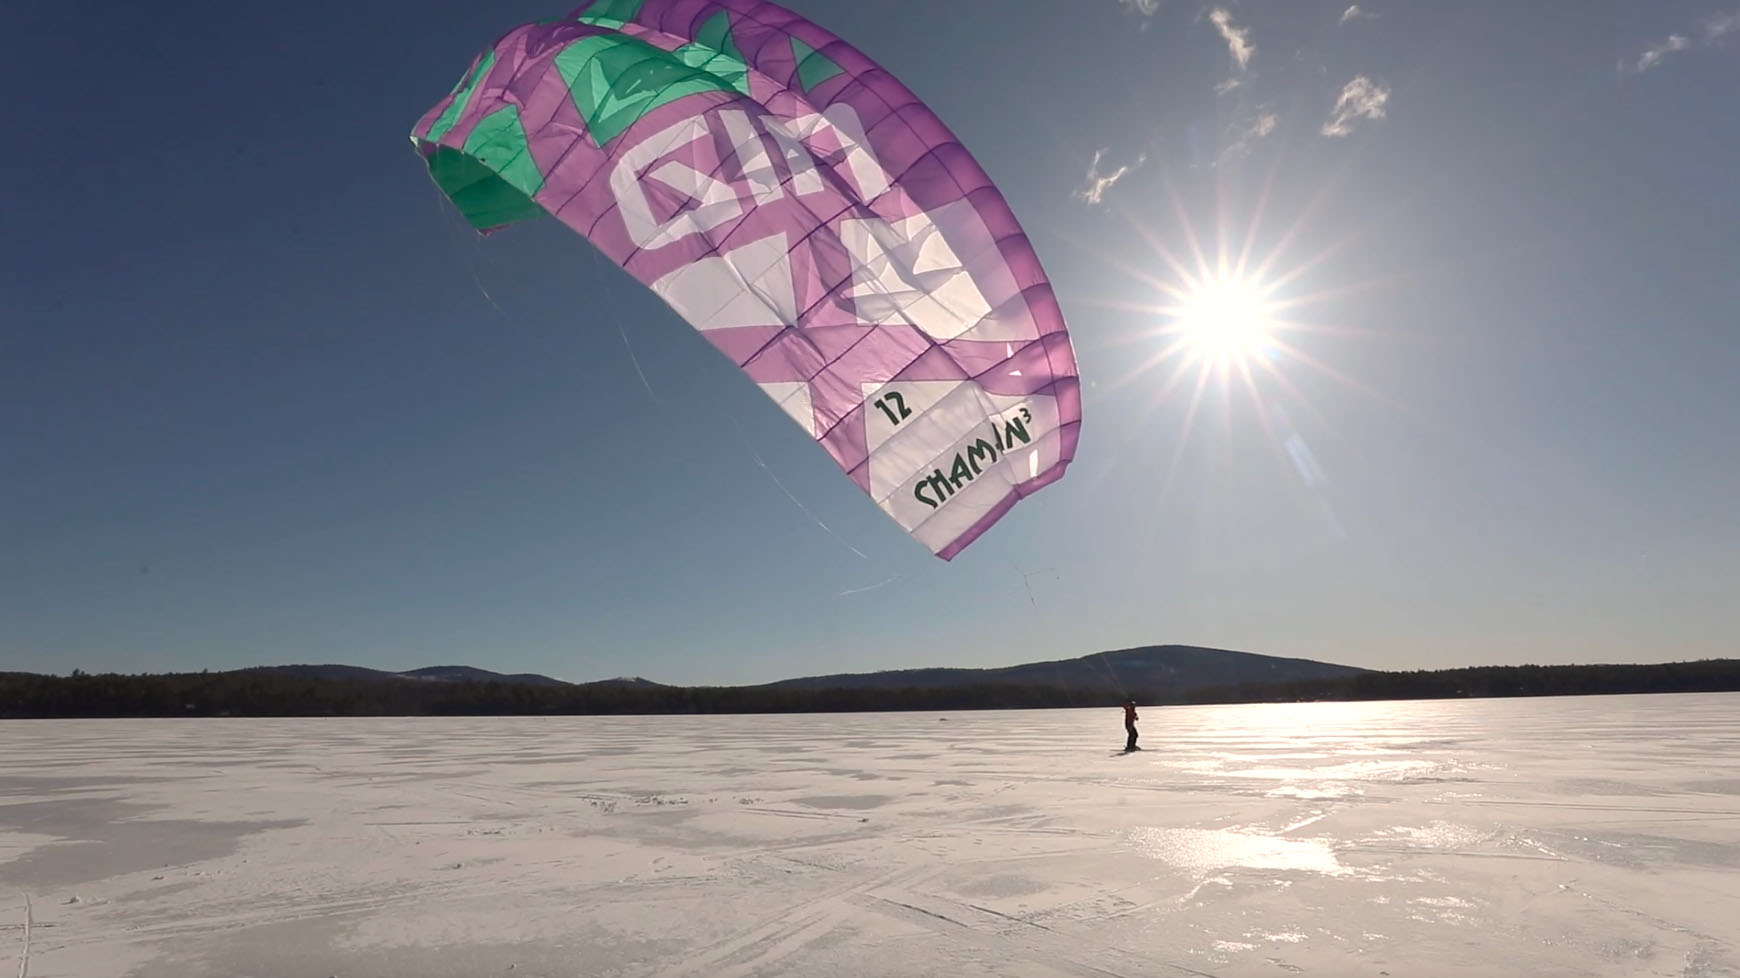 Snow Kiting expedition in Greenland